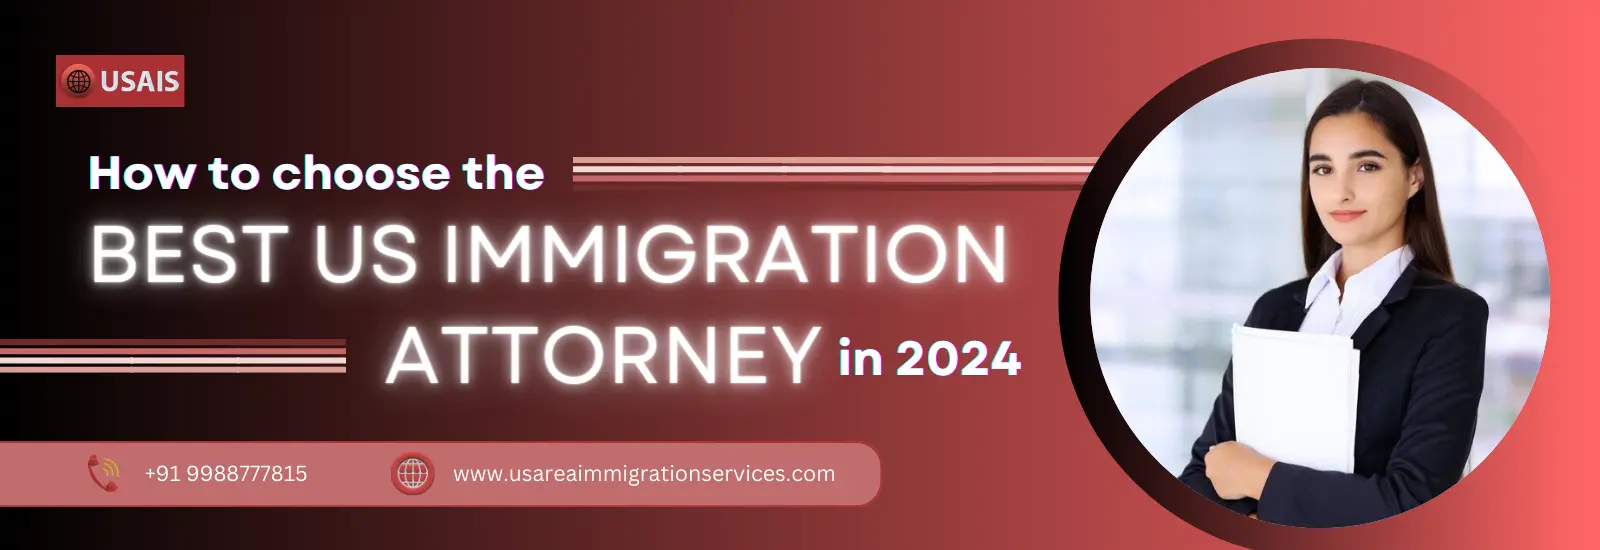 How-To-Choose-The-Best-US-Immigration-Attorney-In-2024